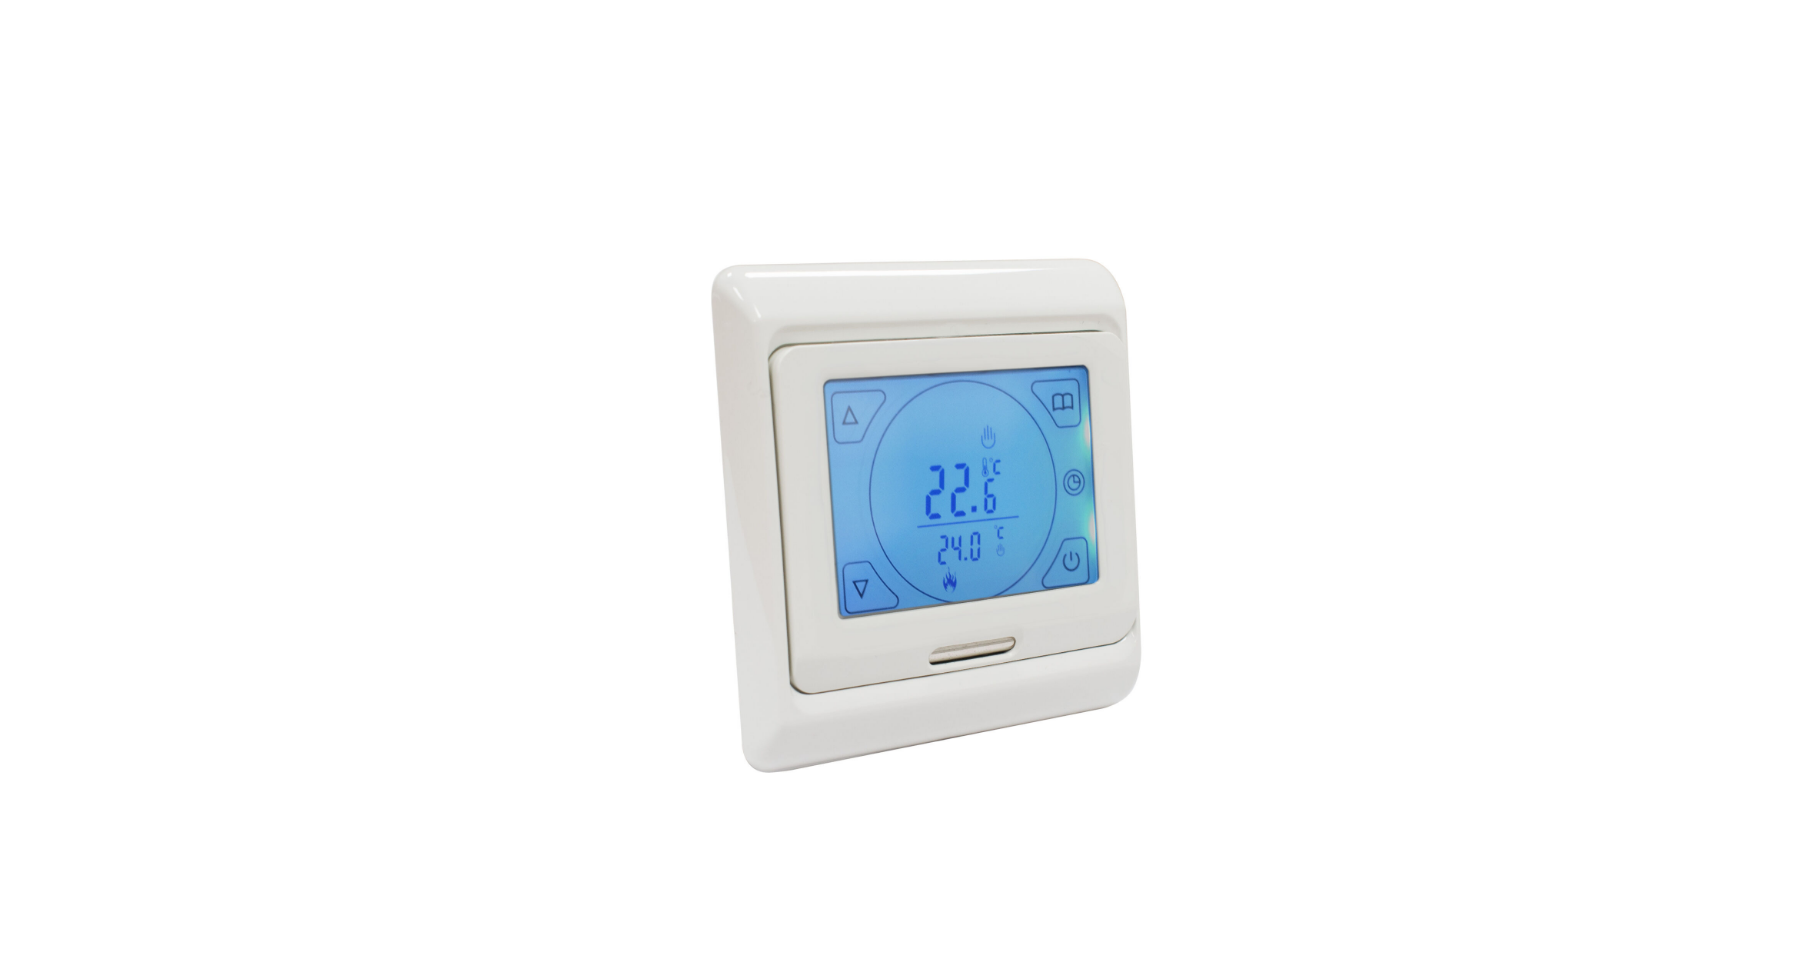 ezheat T2910w TOUCHSCREEN PROGRAMMABLE Thermostat INSTRUCTION MANUAL